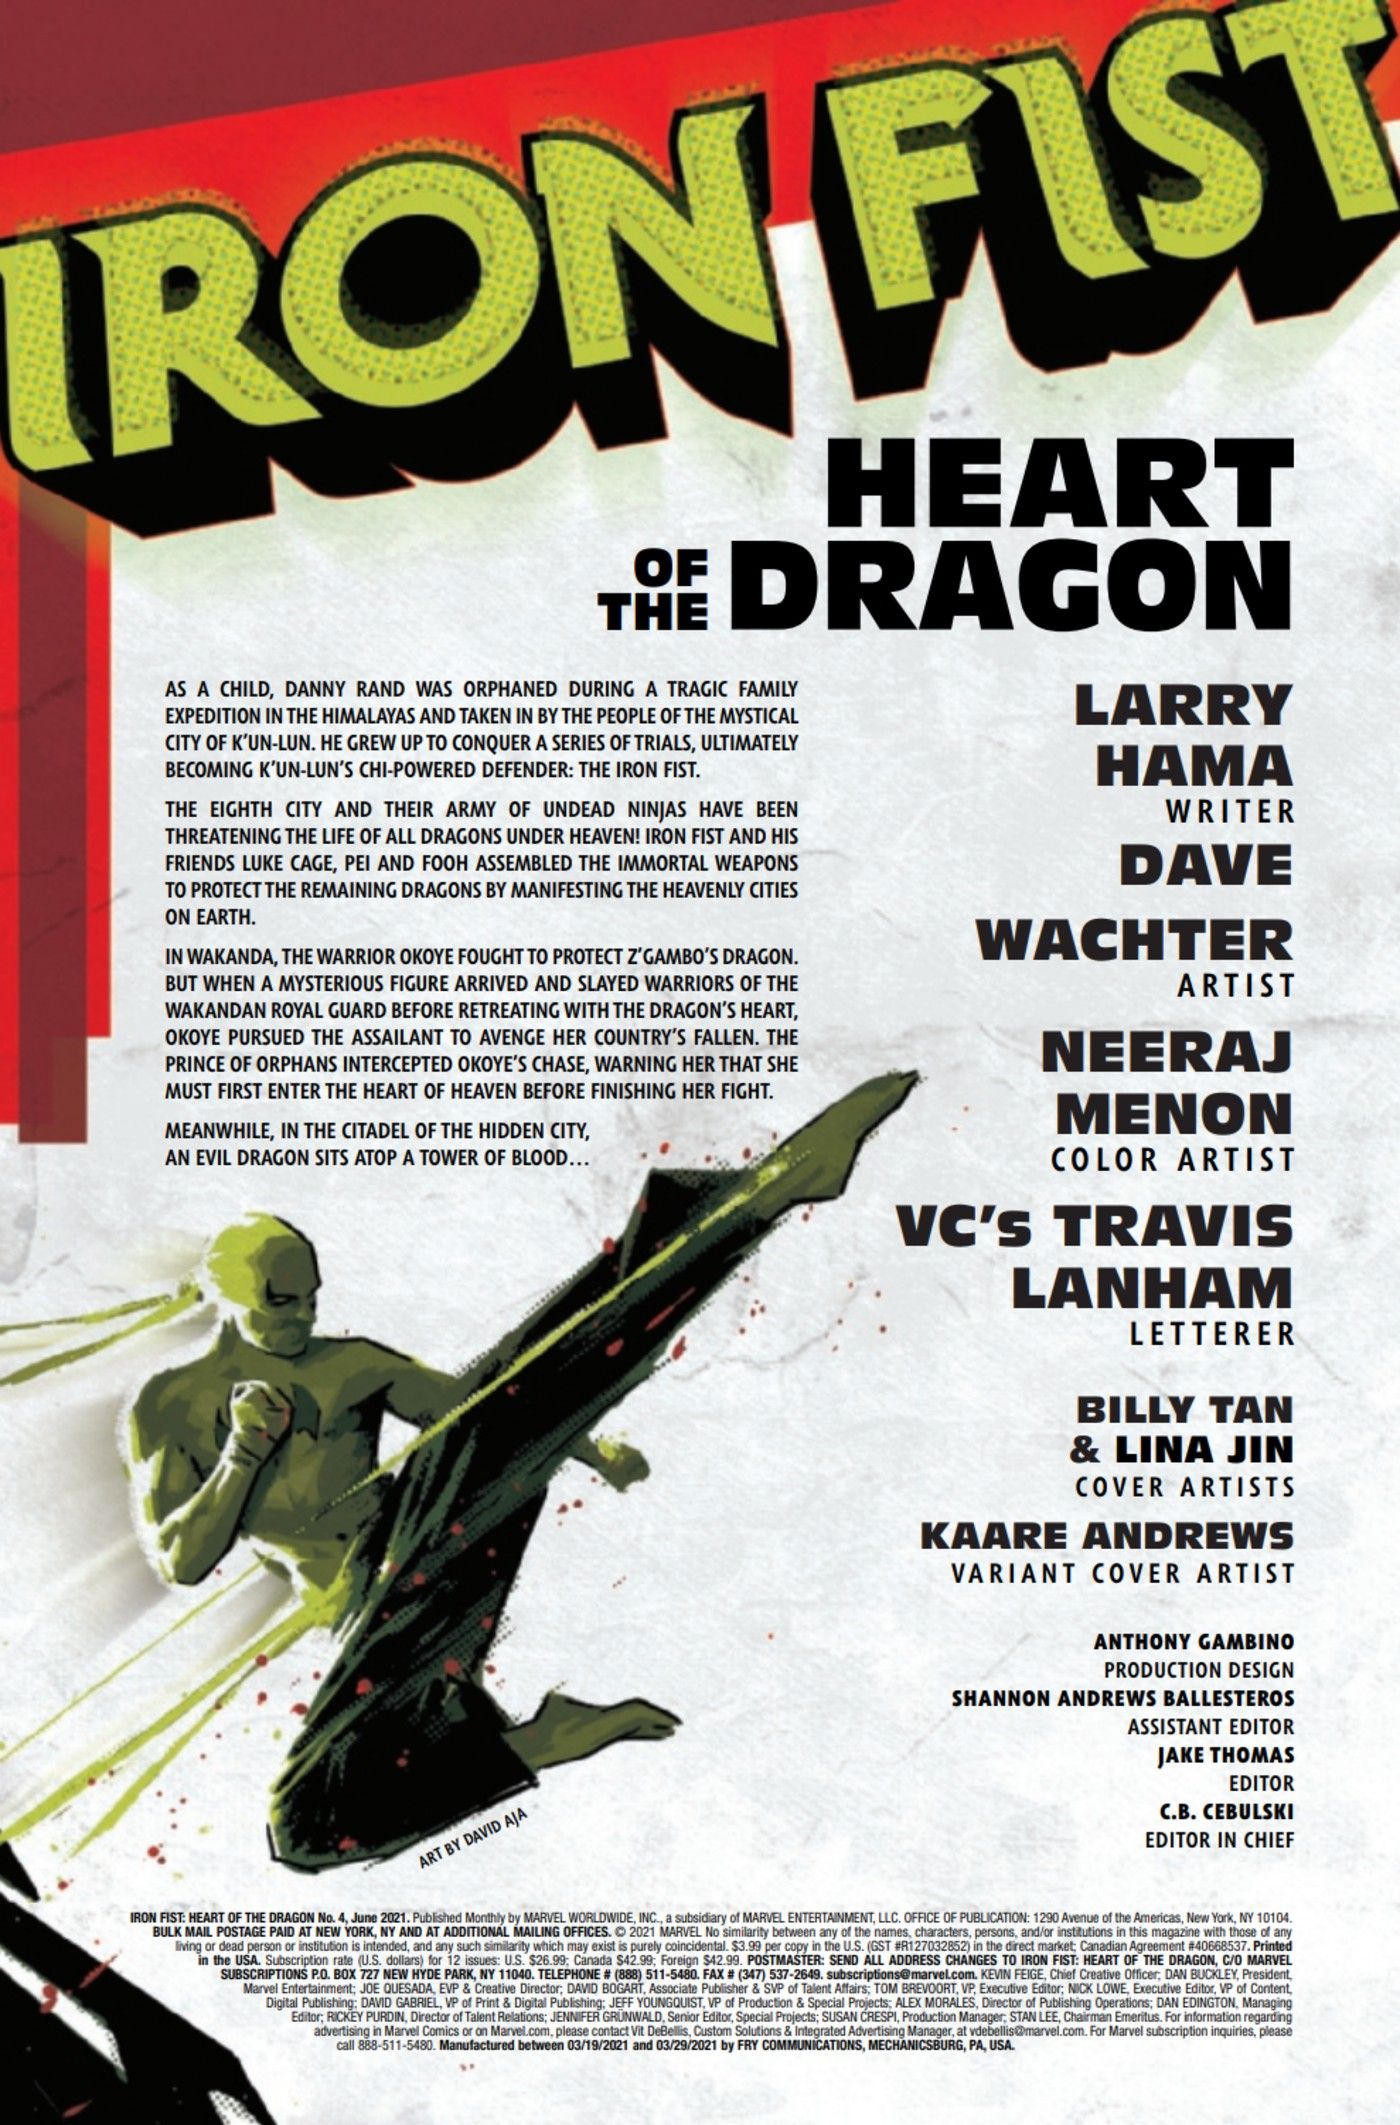 Iron Fist Heart of the Dragon credits tldr vertical